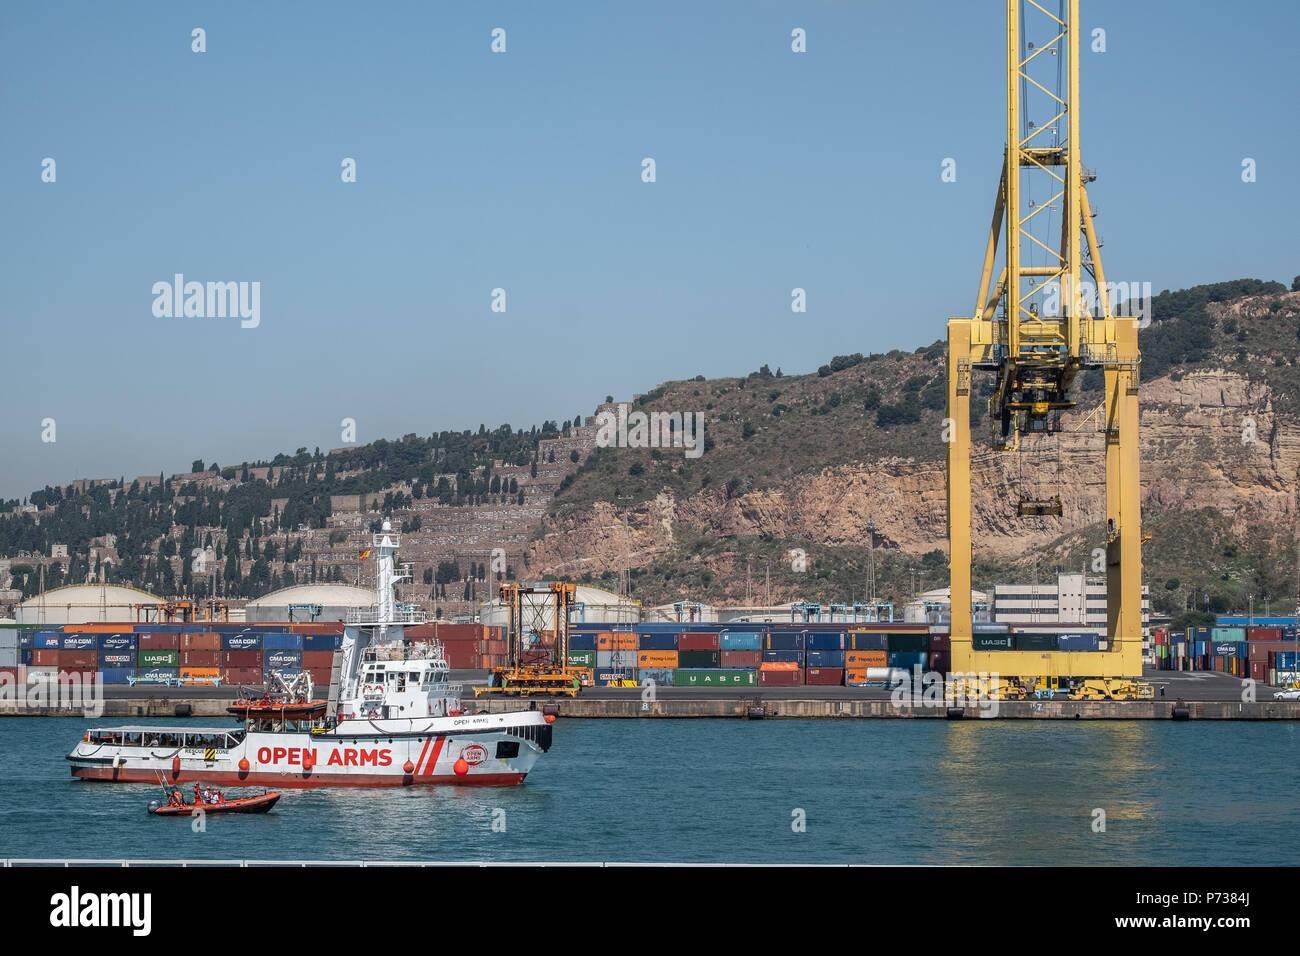 The rescue boat Proactiva Open Arms has docked in Barcelona with 60 people rescued in the Mediterranean off the coast of Libya. Barcelona has offered itself as a refuge city after Italy's refusal to continue hosting more rescues carried out by NGOs. Stock Photo